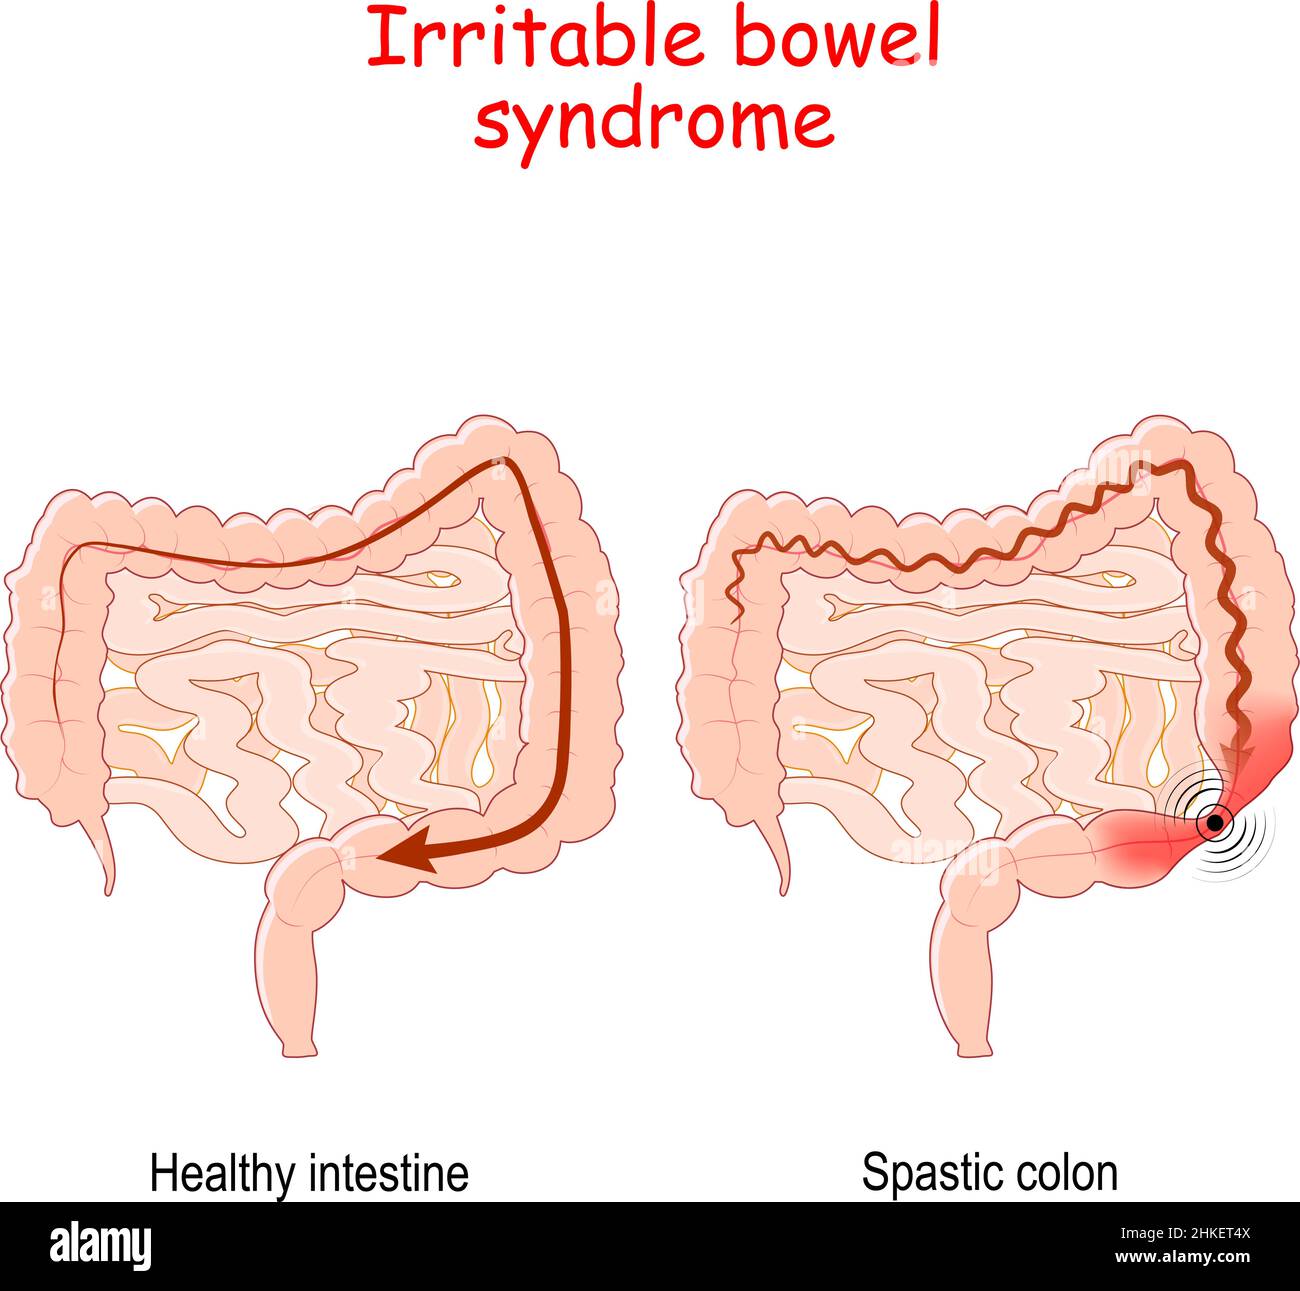 Irritable bowel syndrome is a functional gastrointestinal disorder. Vector illustration Stock Vector